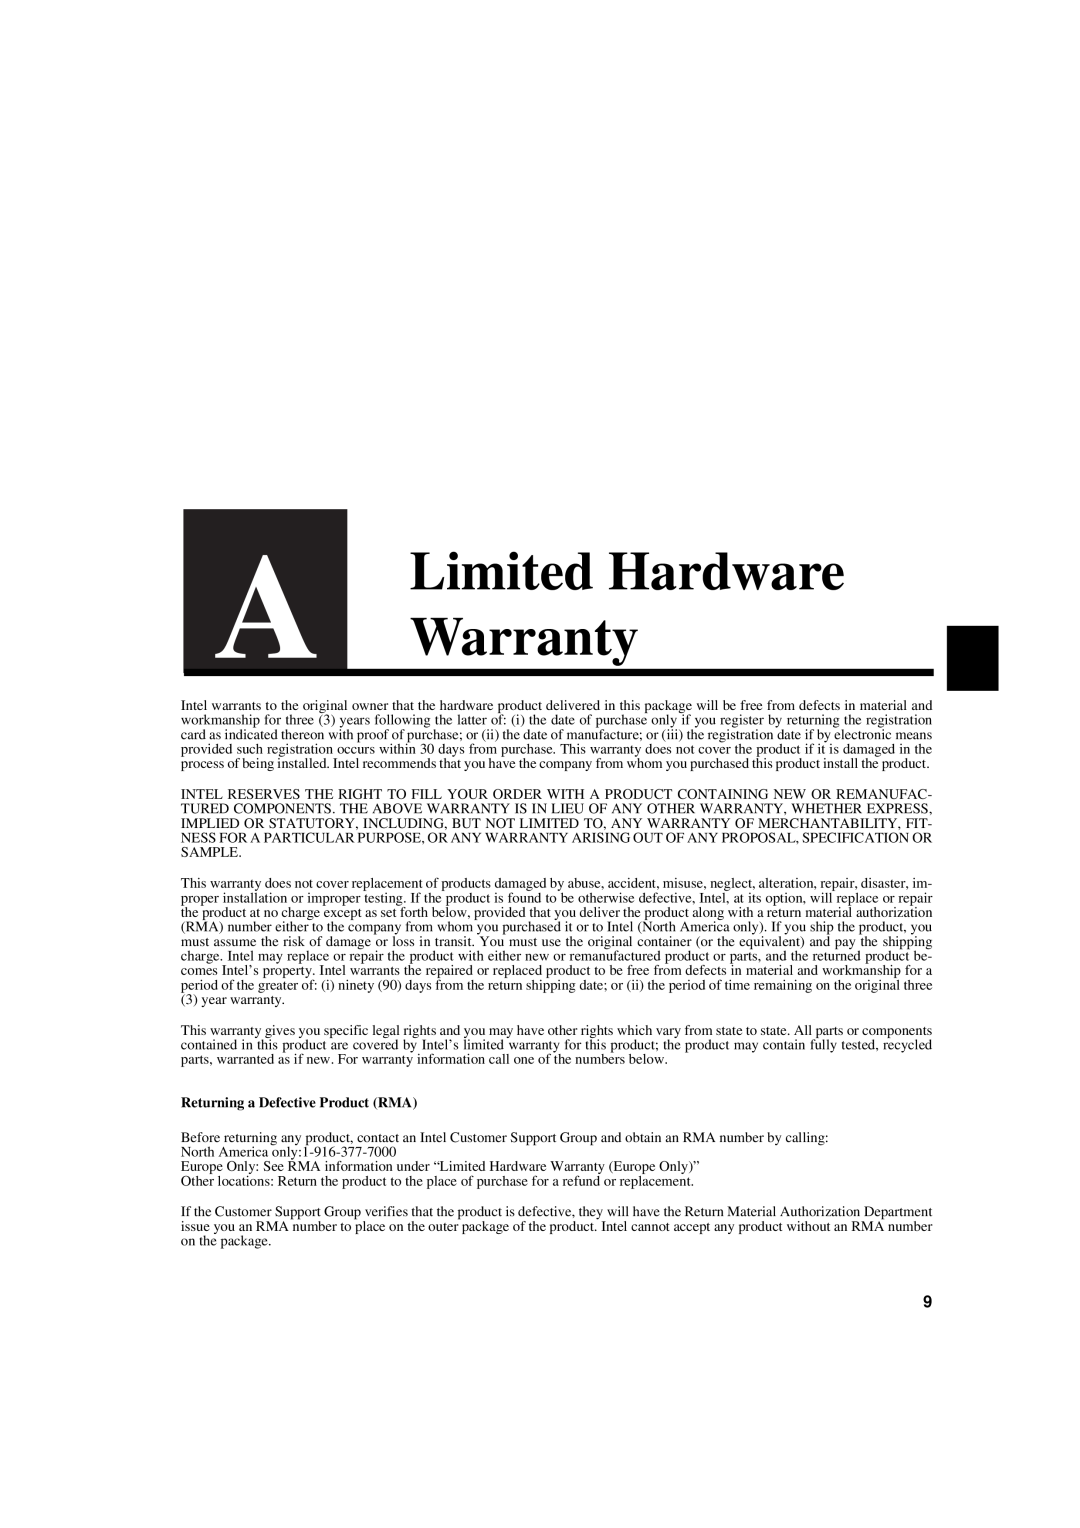 Intel 1000SX manual Limited Hardware Warranty, Returning a Defective Product RMA 